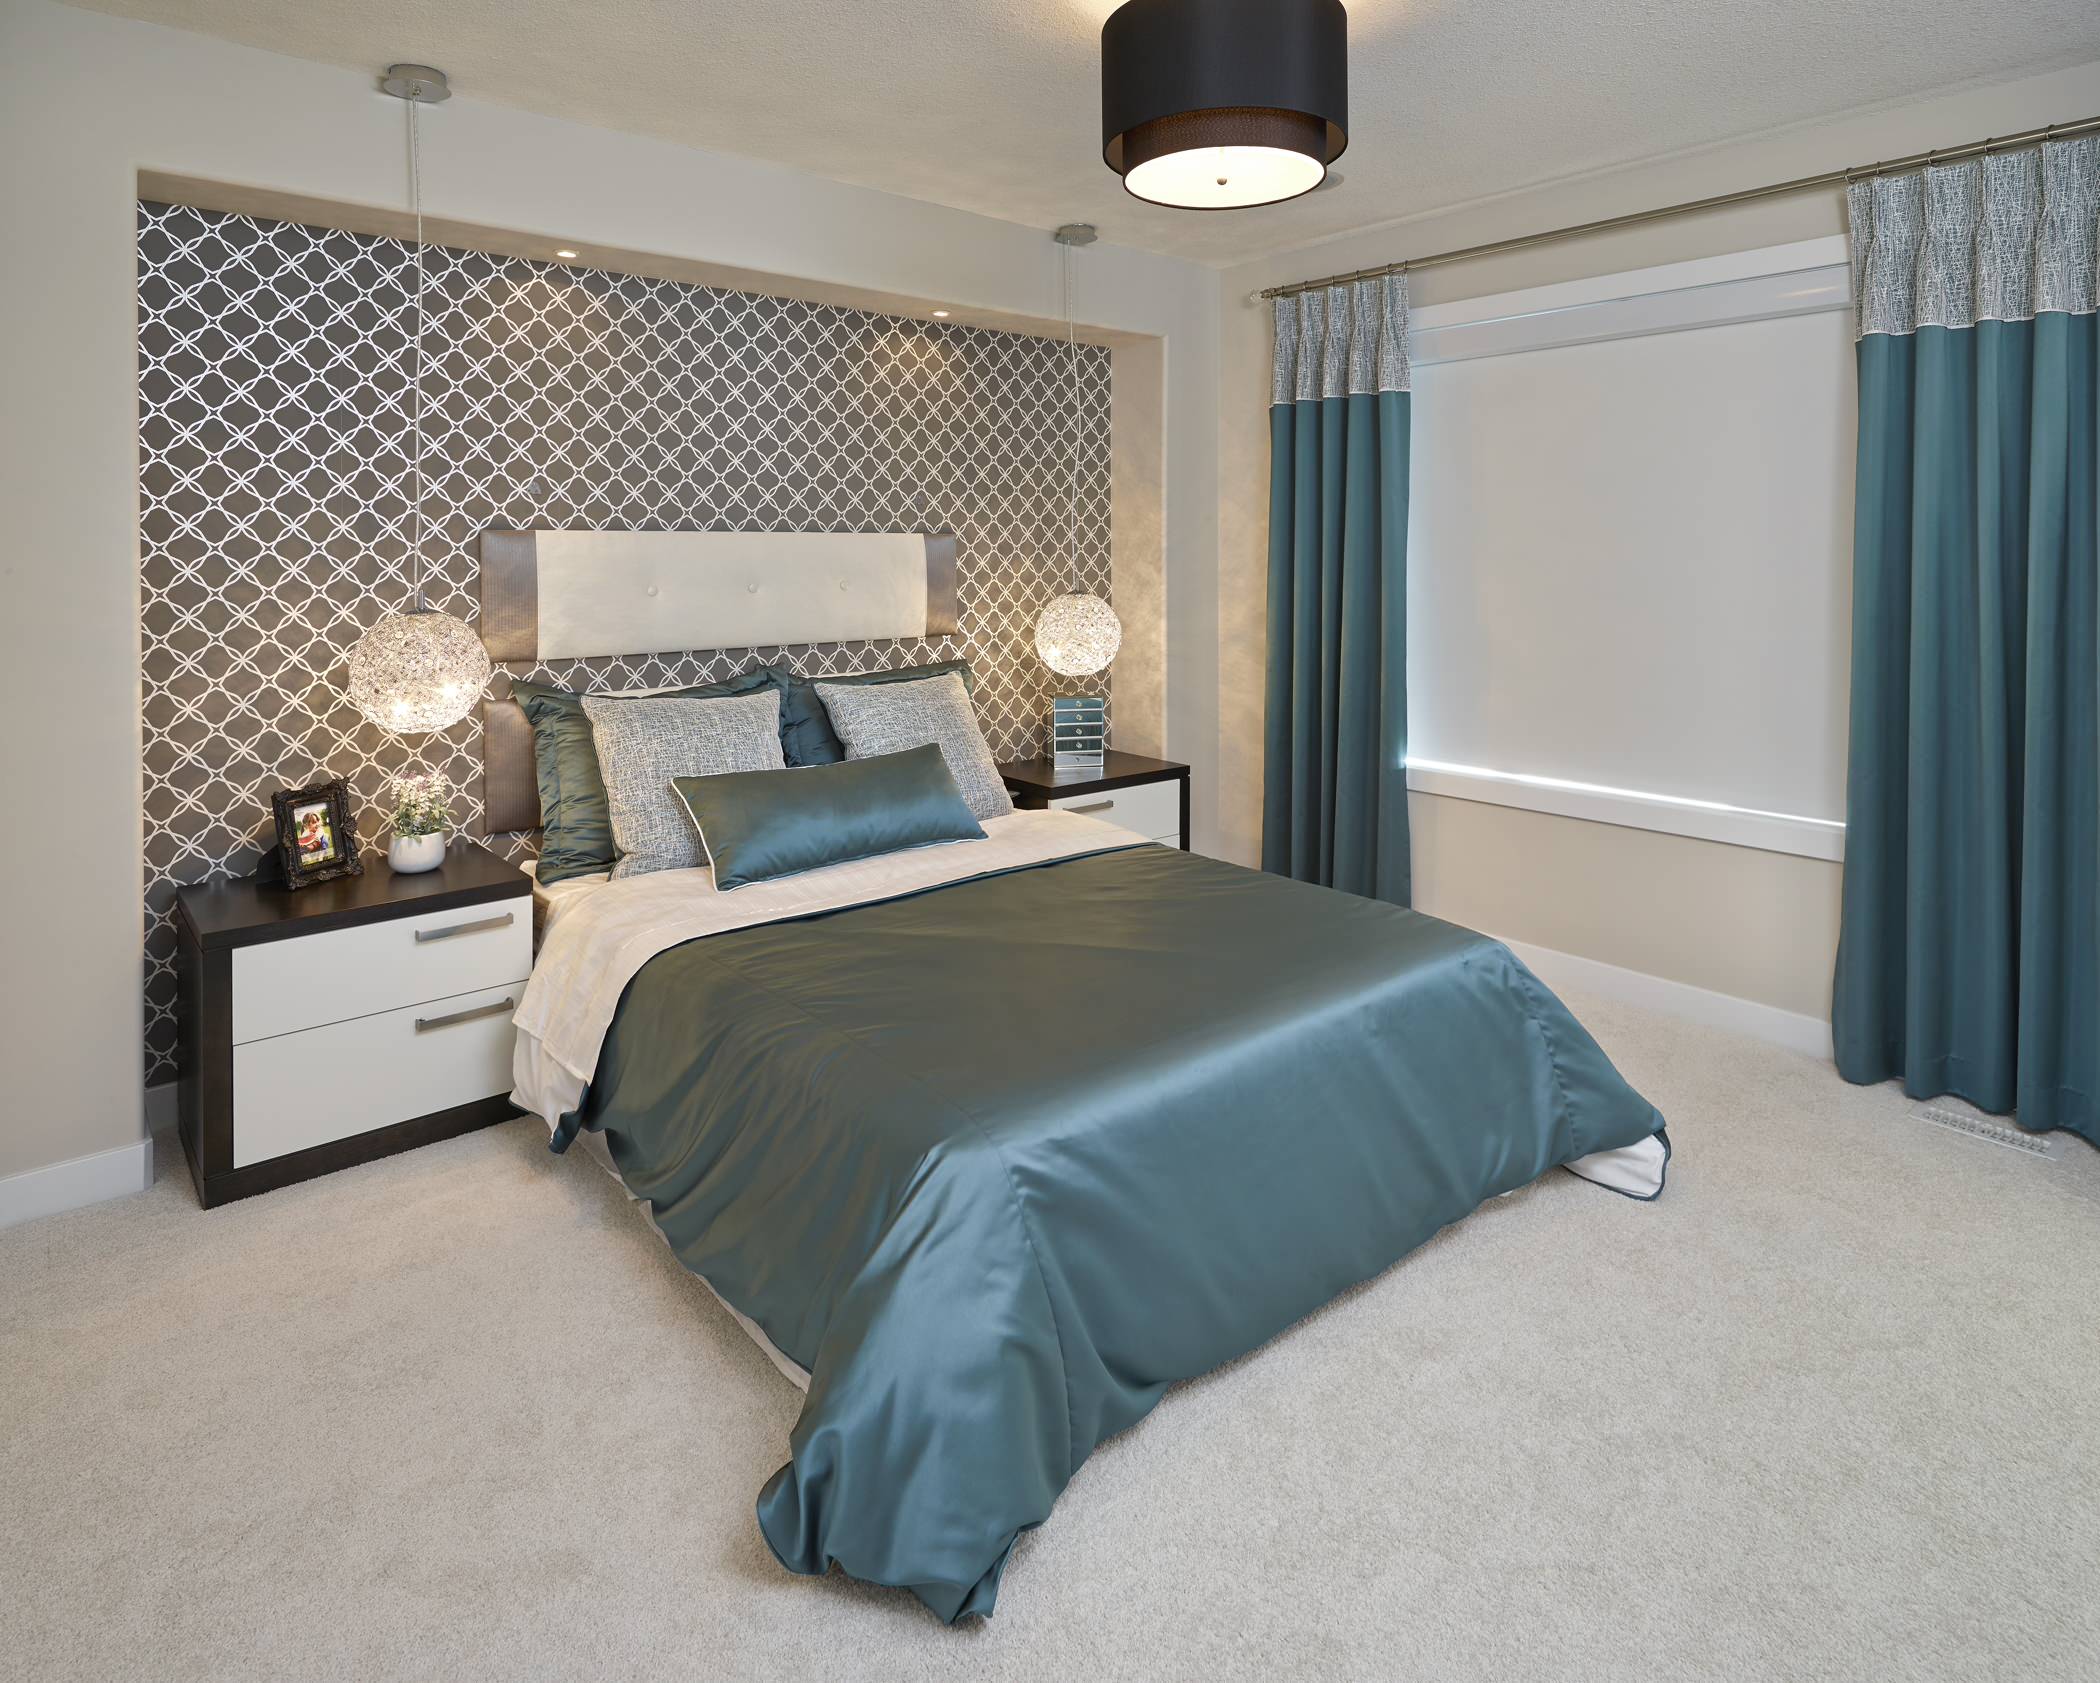 Wonderful grey and teal bedroom Turquoise And Gray Bedroom Ideas Photos Houzz